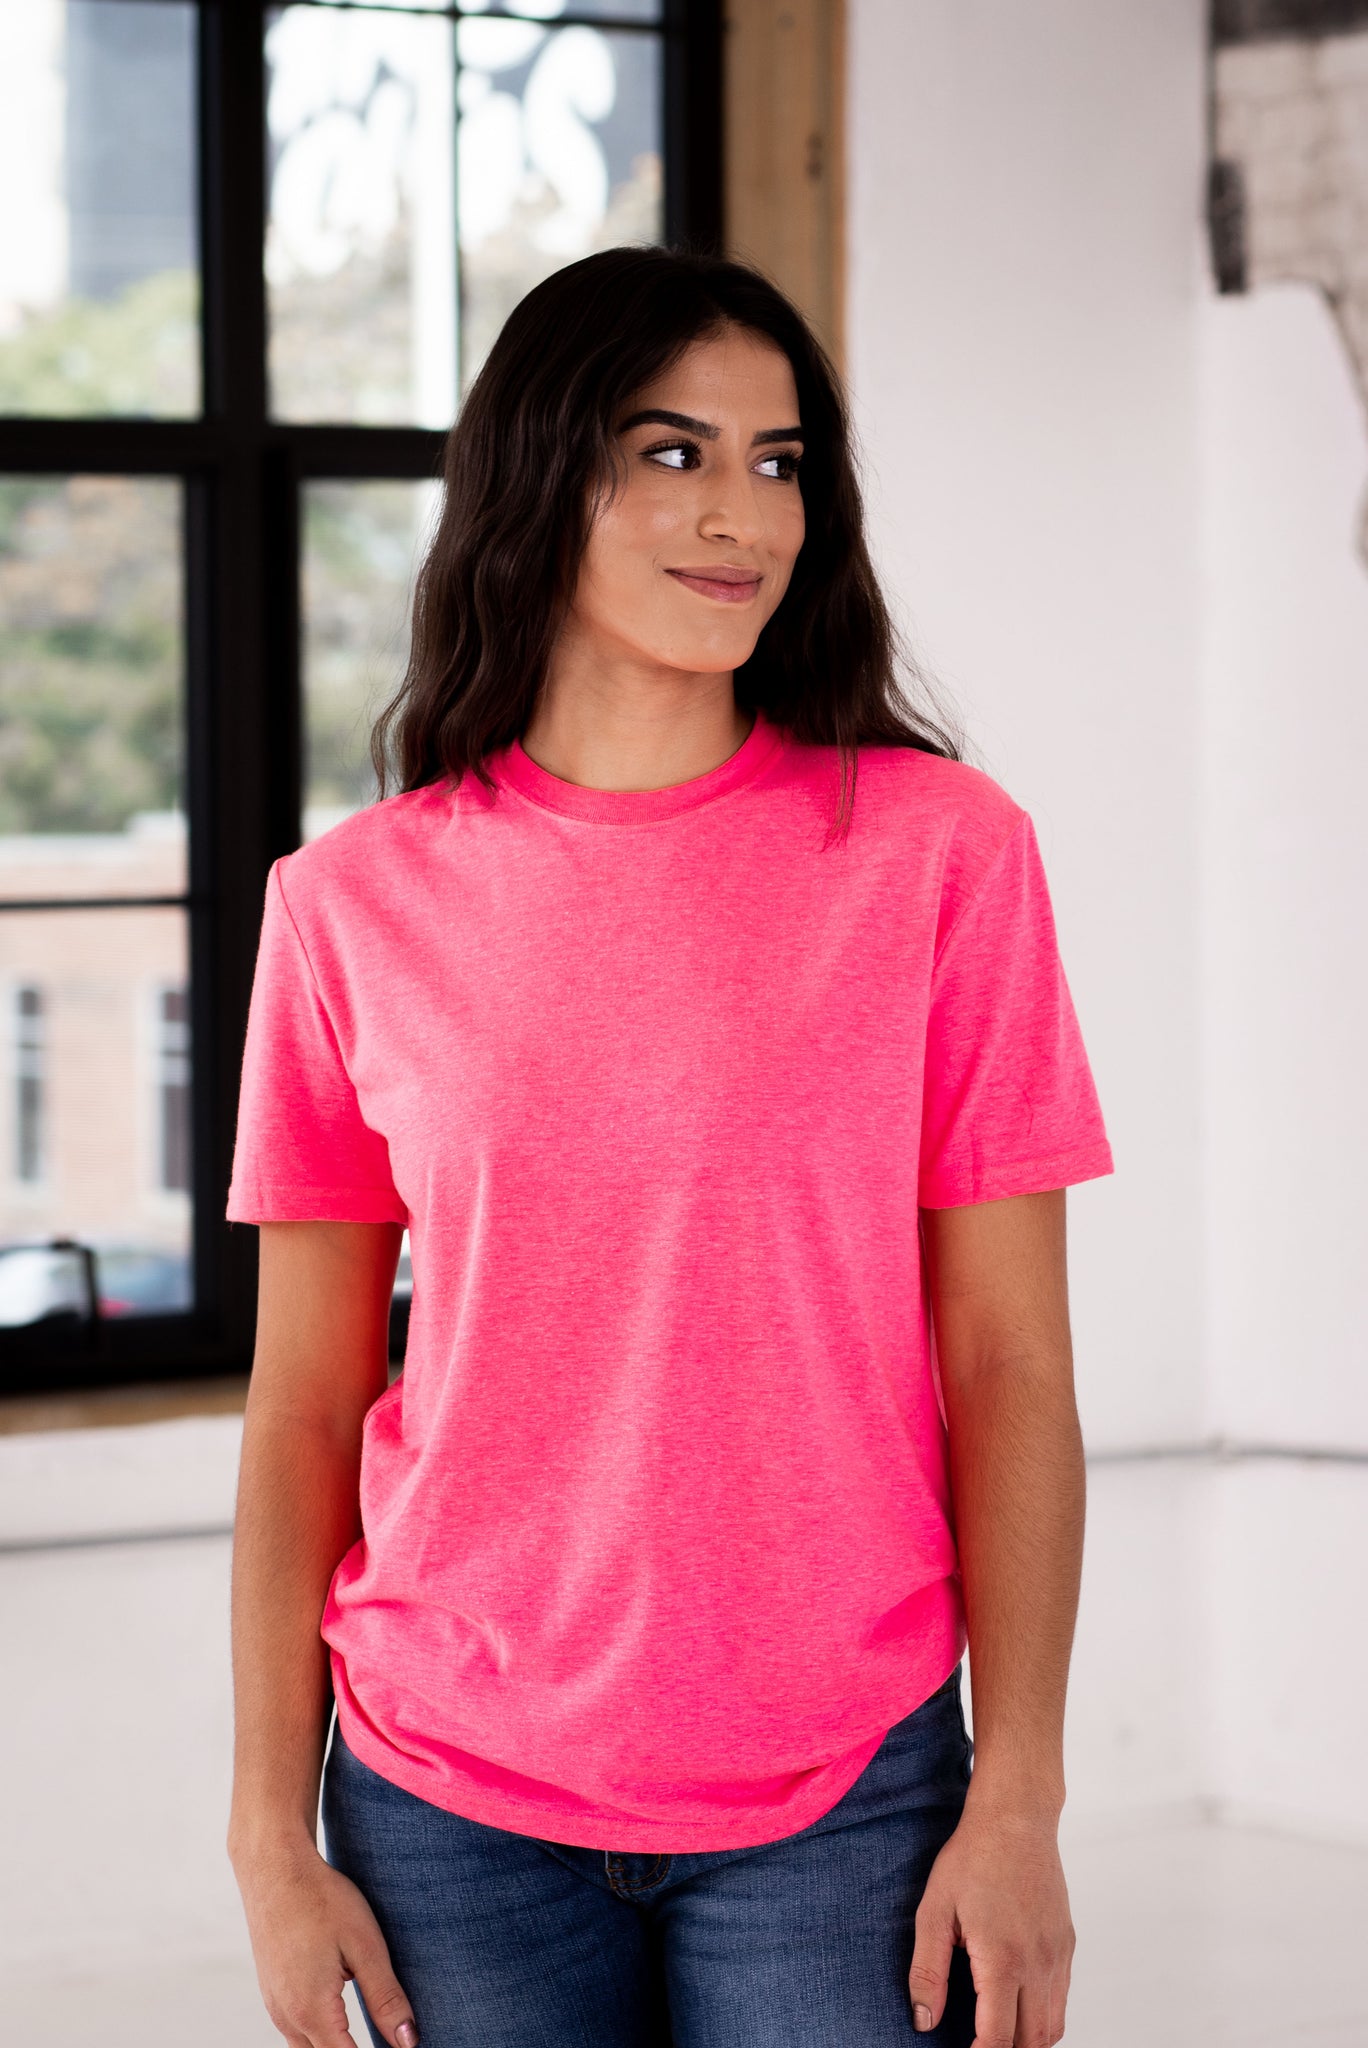 Female Model wearing GOEX Eco Triblend Unisex and Men's Tee in Neon Pink